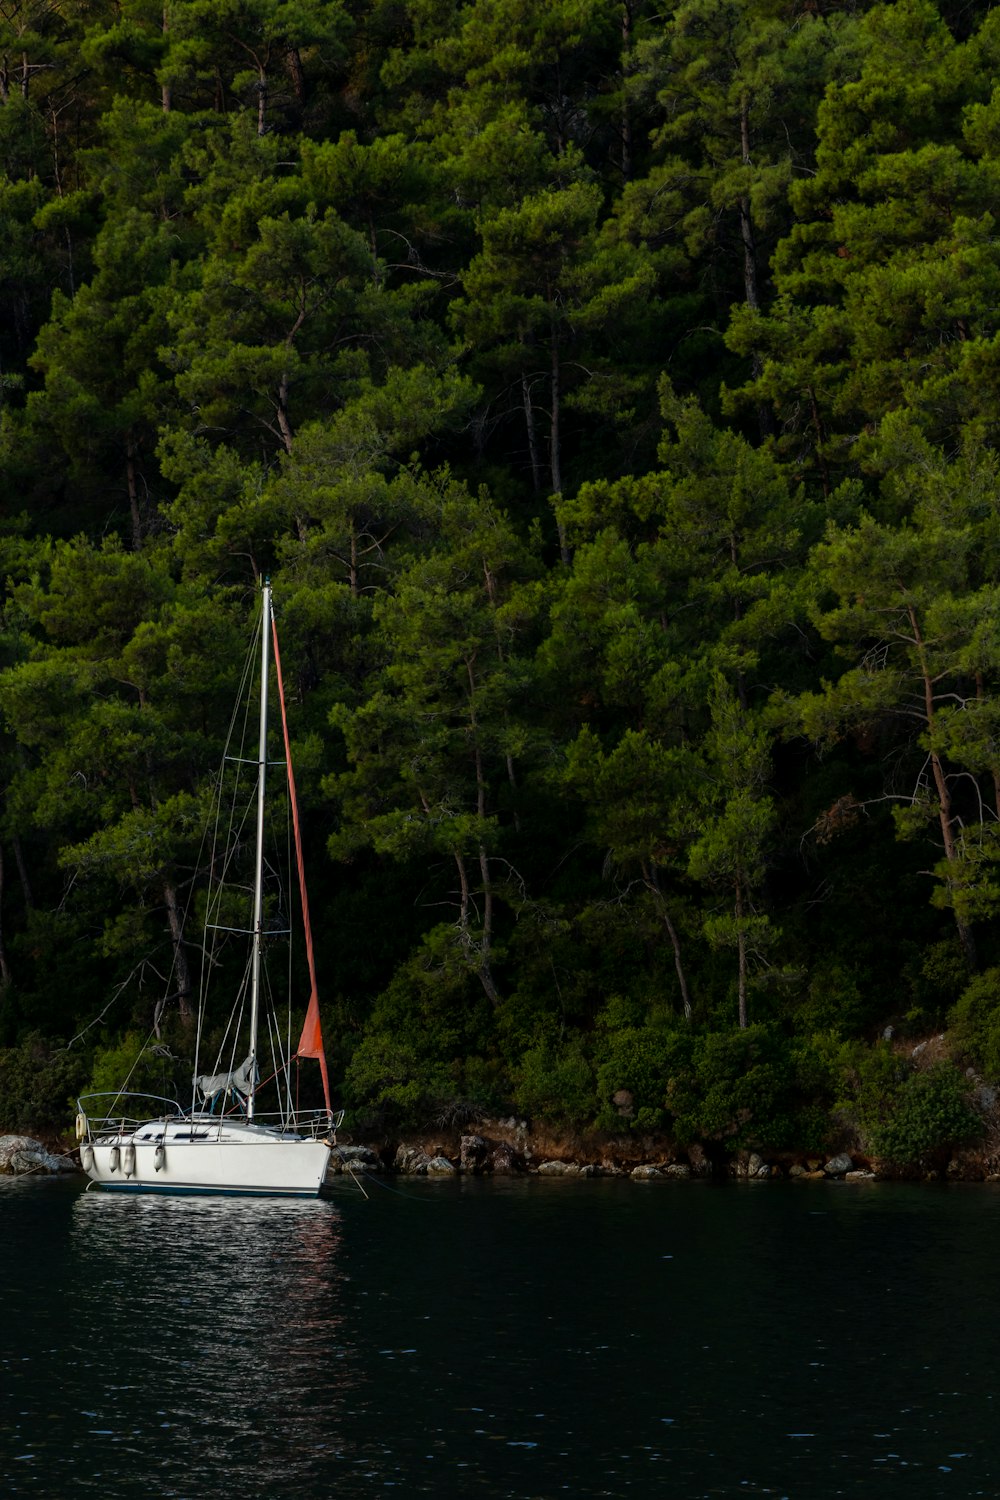 white sailboat on body of water near green trees during daytime